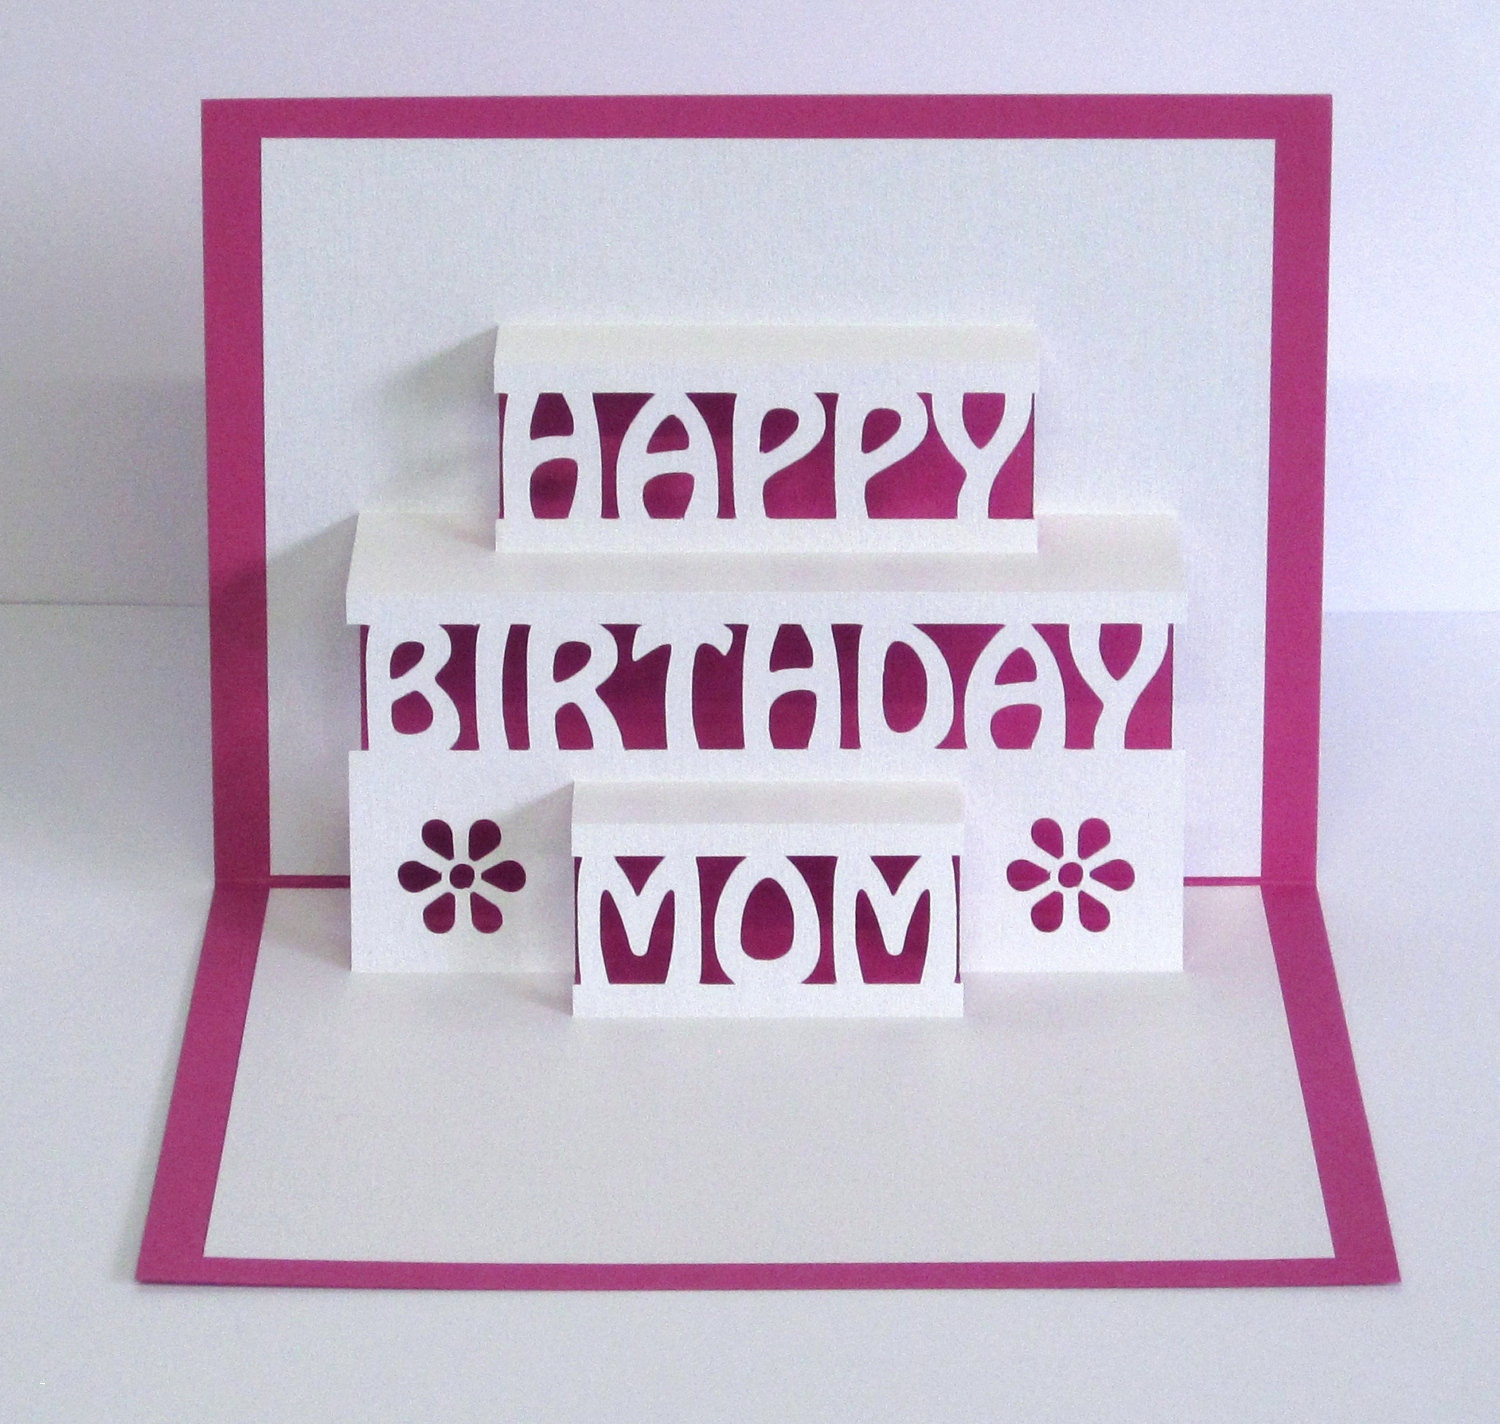 Birthday Card Ideas For Mom Birthday Card From Mom To Daughter Happy Birthday Mom Cards Best